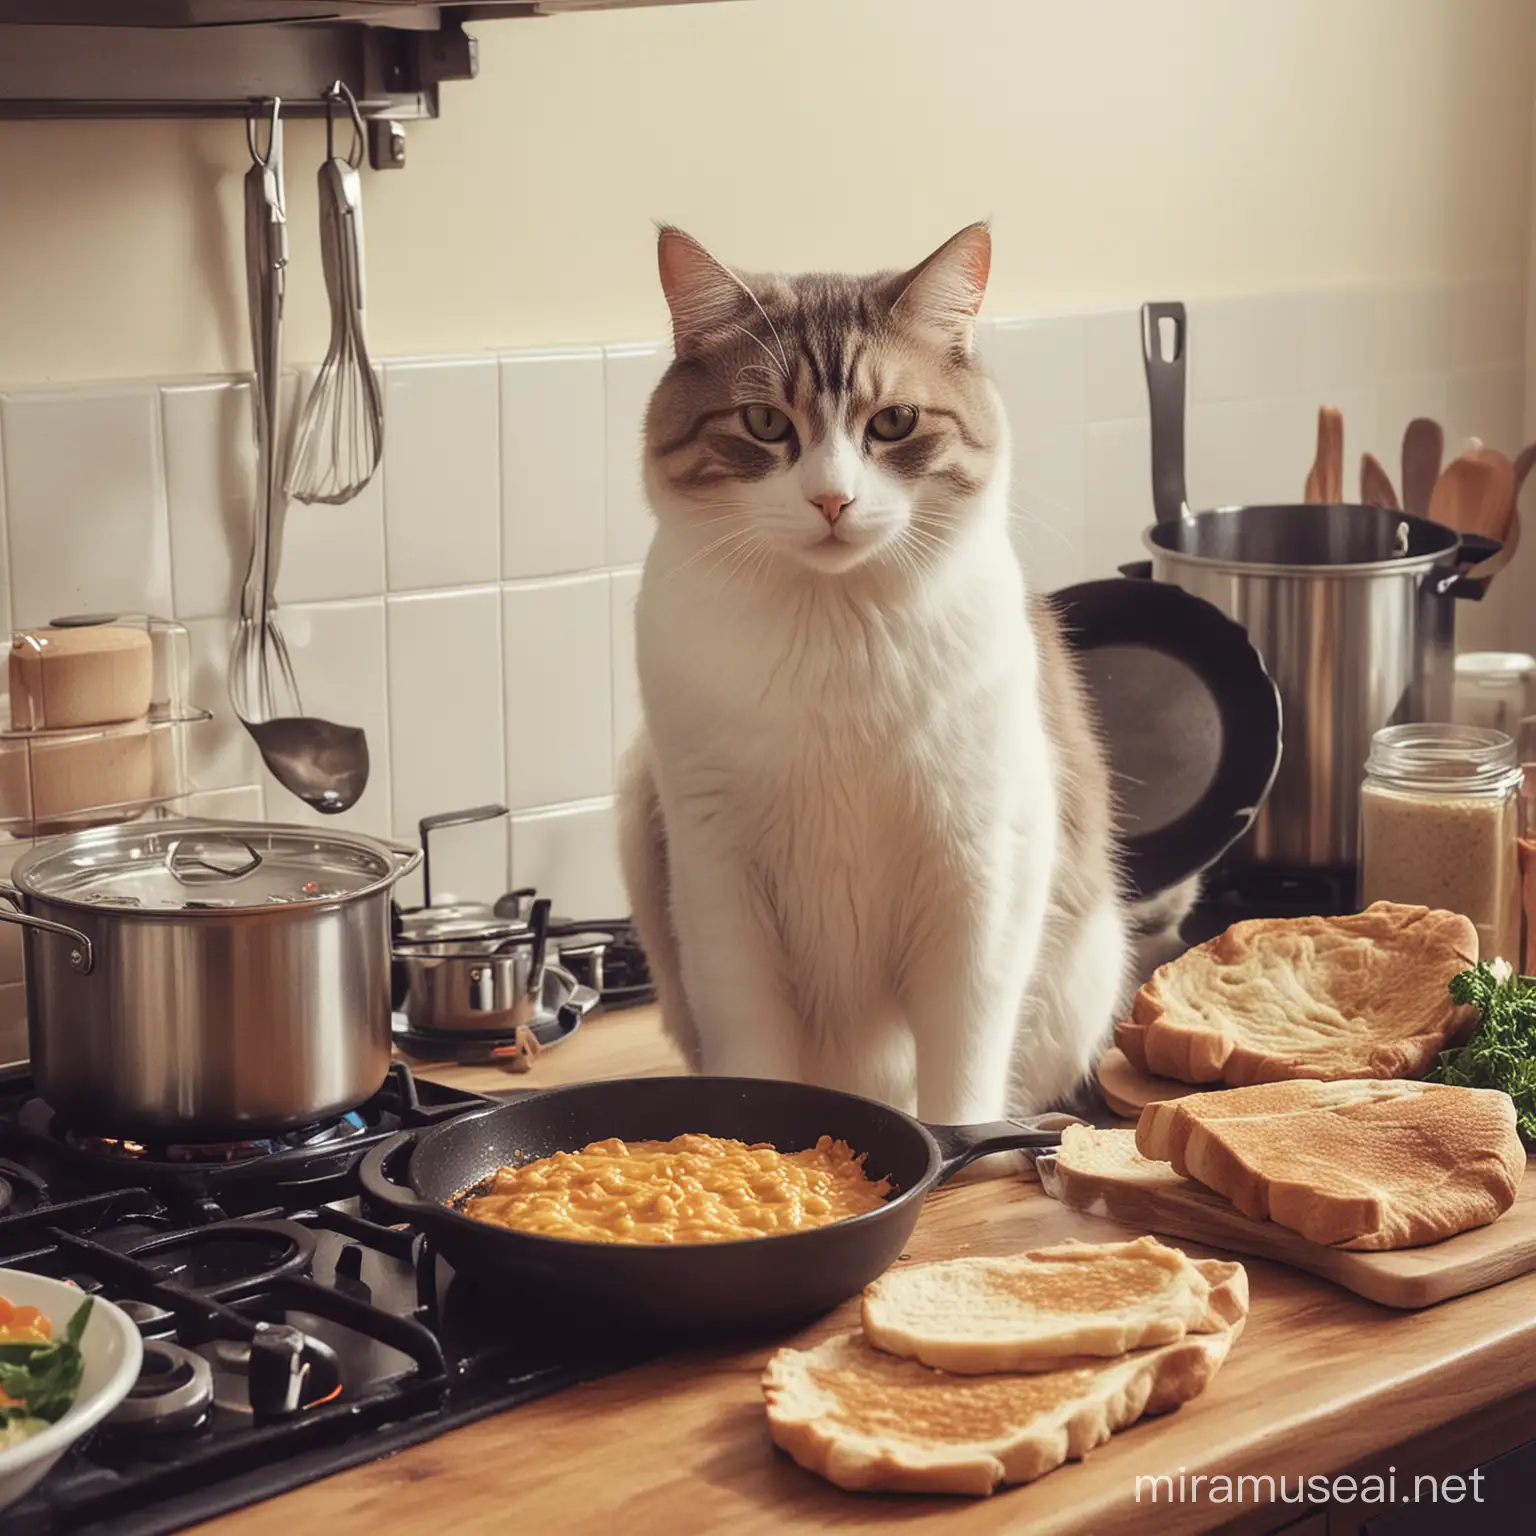 Adorable Cat Engaged in Culinary Delights